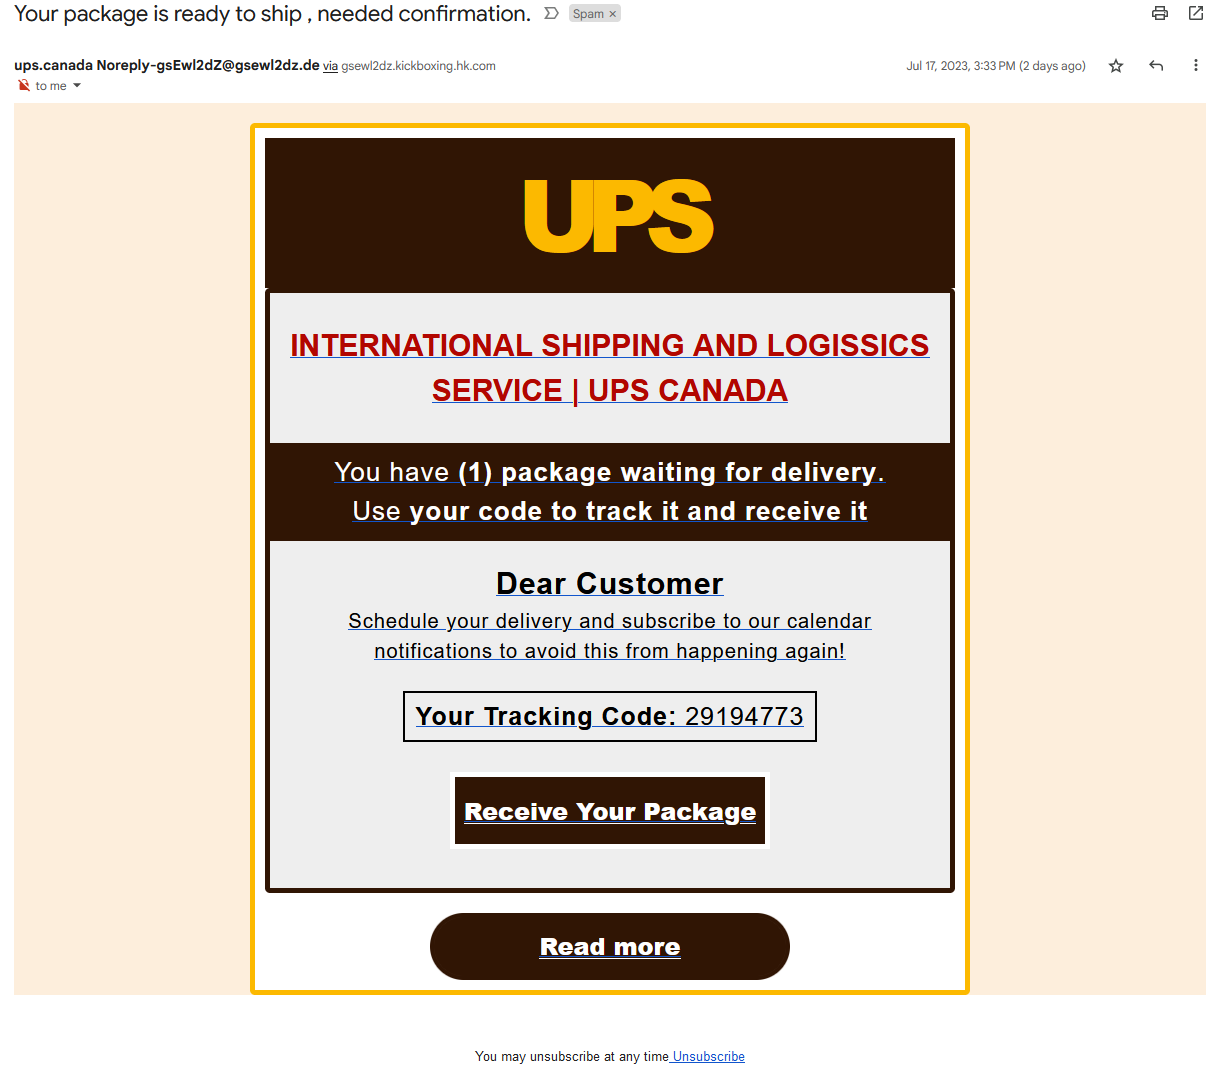 Example of a UPS phishing email